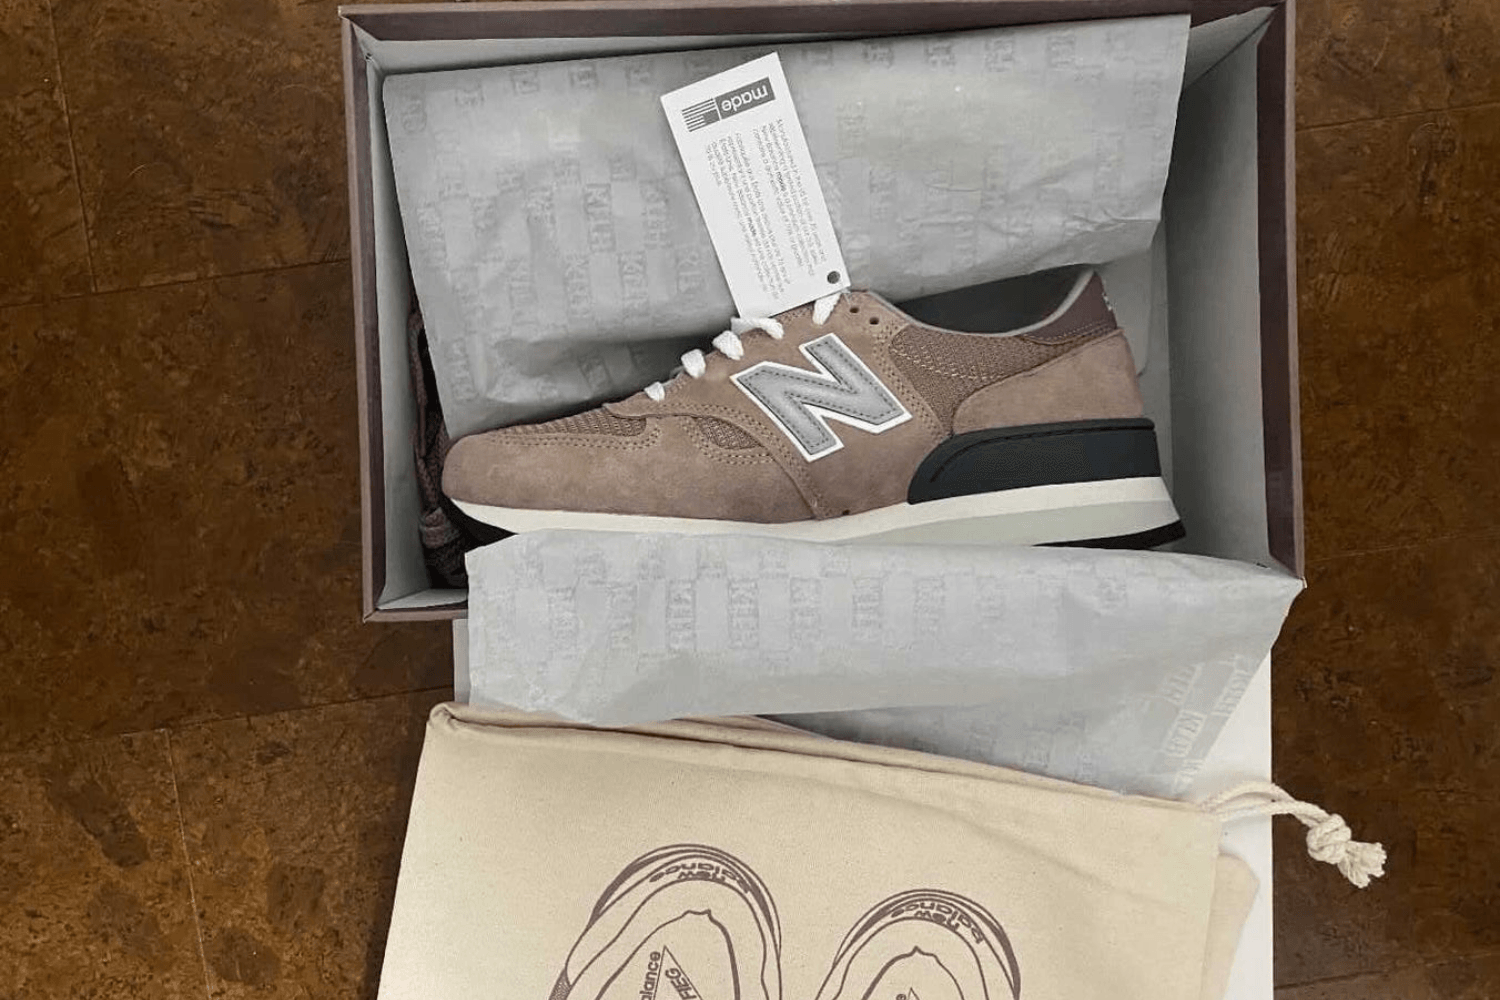 Kith and New Balance drop 990v1 'Dusty Rose' in 2022